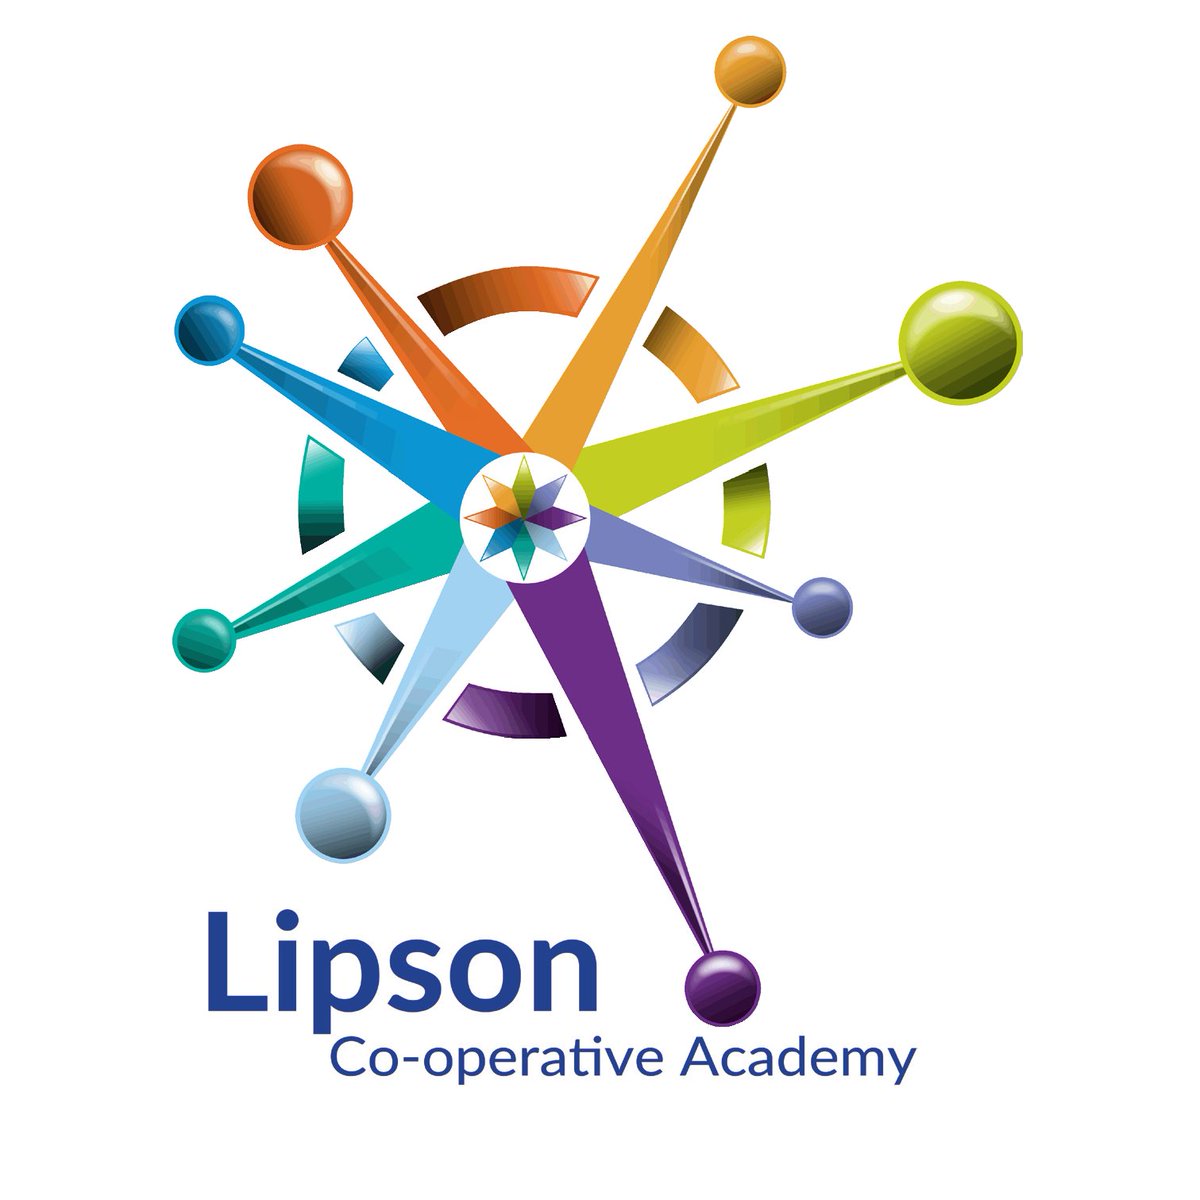 🏆 Celebrating our Trust of schools – this week’s focus is on @Lipson Co-operative Academy. Music & theatre are at the heart of the school’s community, whether it’s through the Music Academy or productions at their theatre.
zurl.co/1FXr
 #LipsonLife #transforminglives